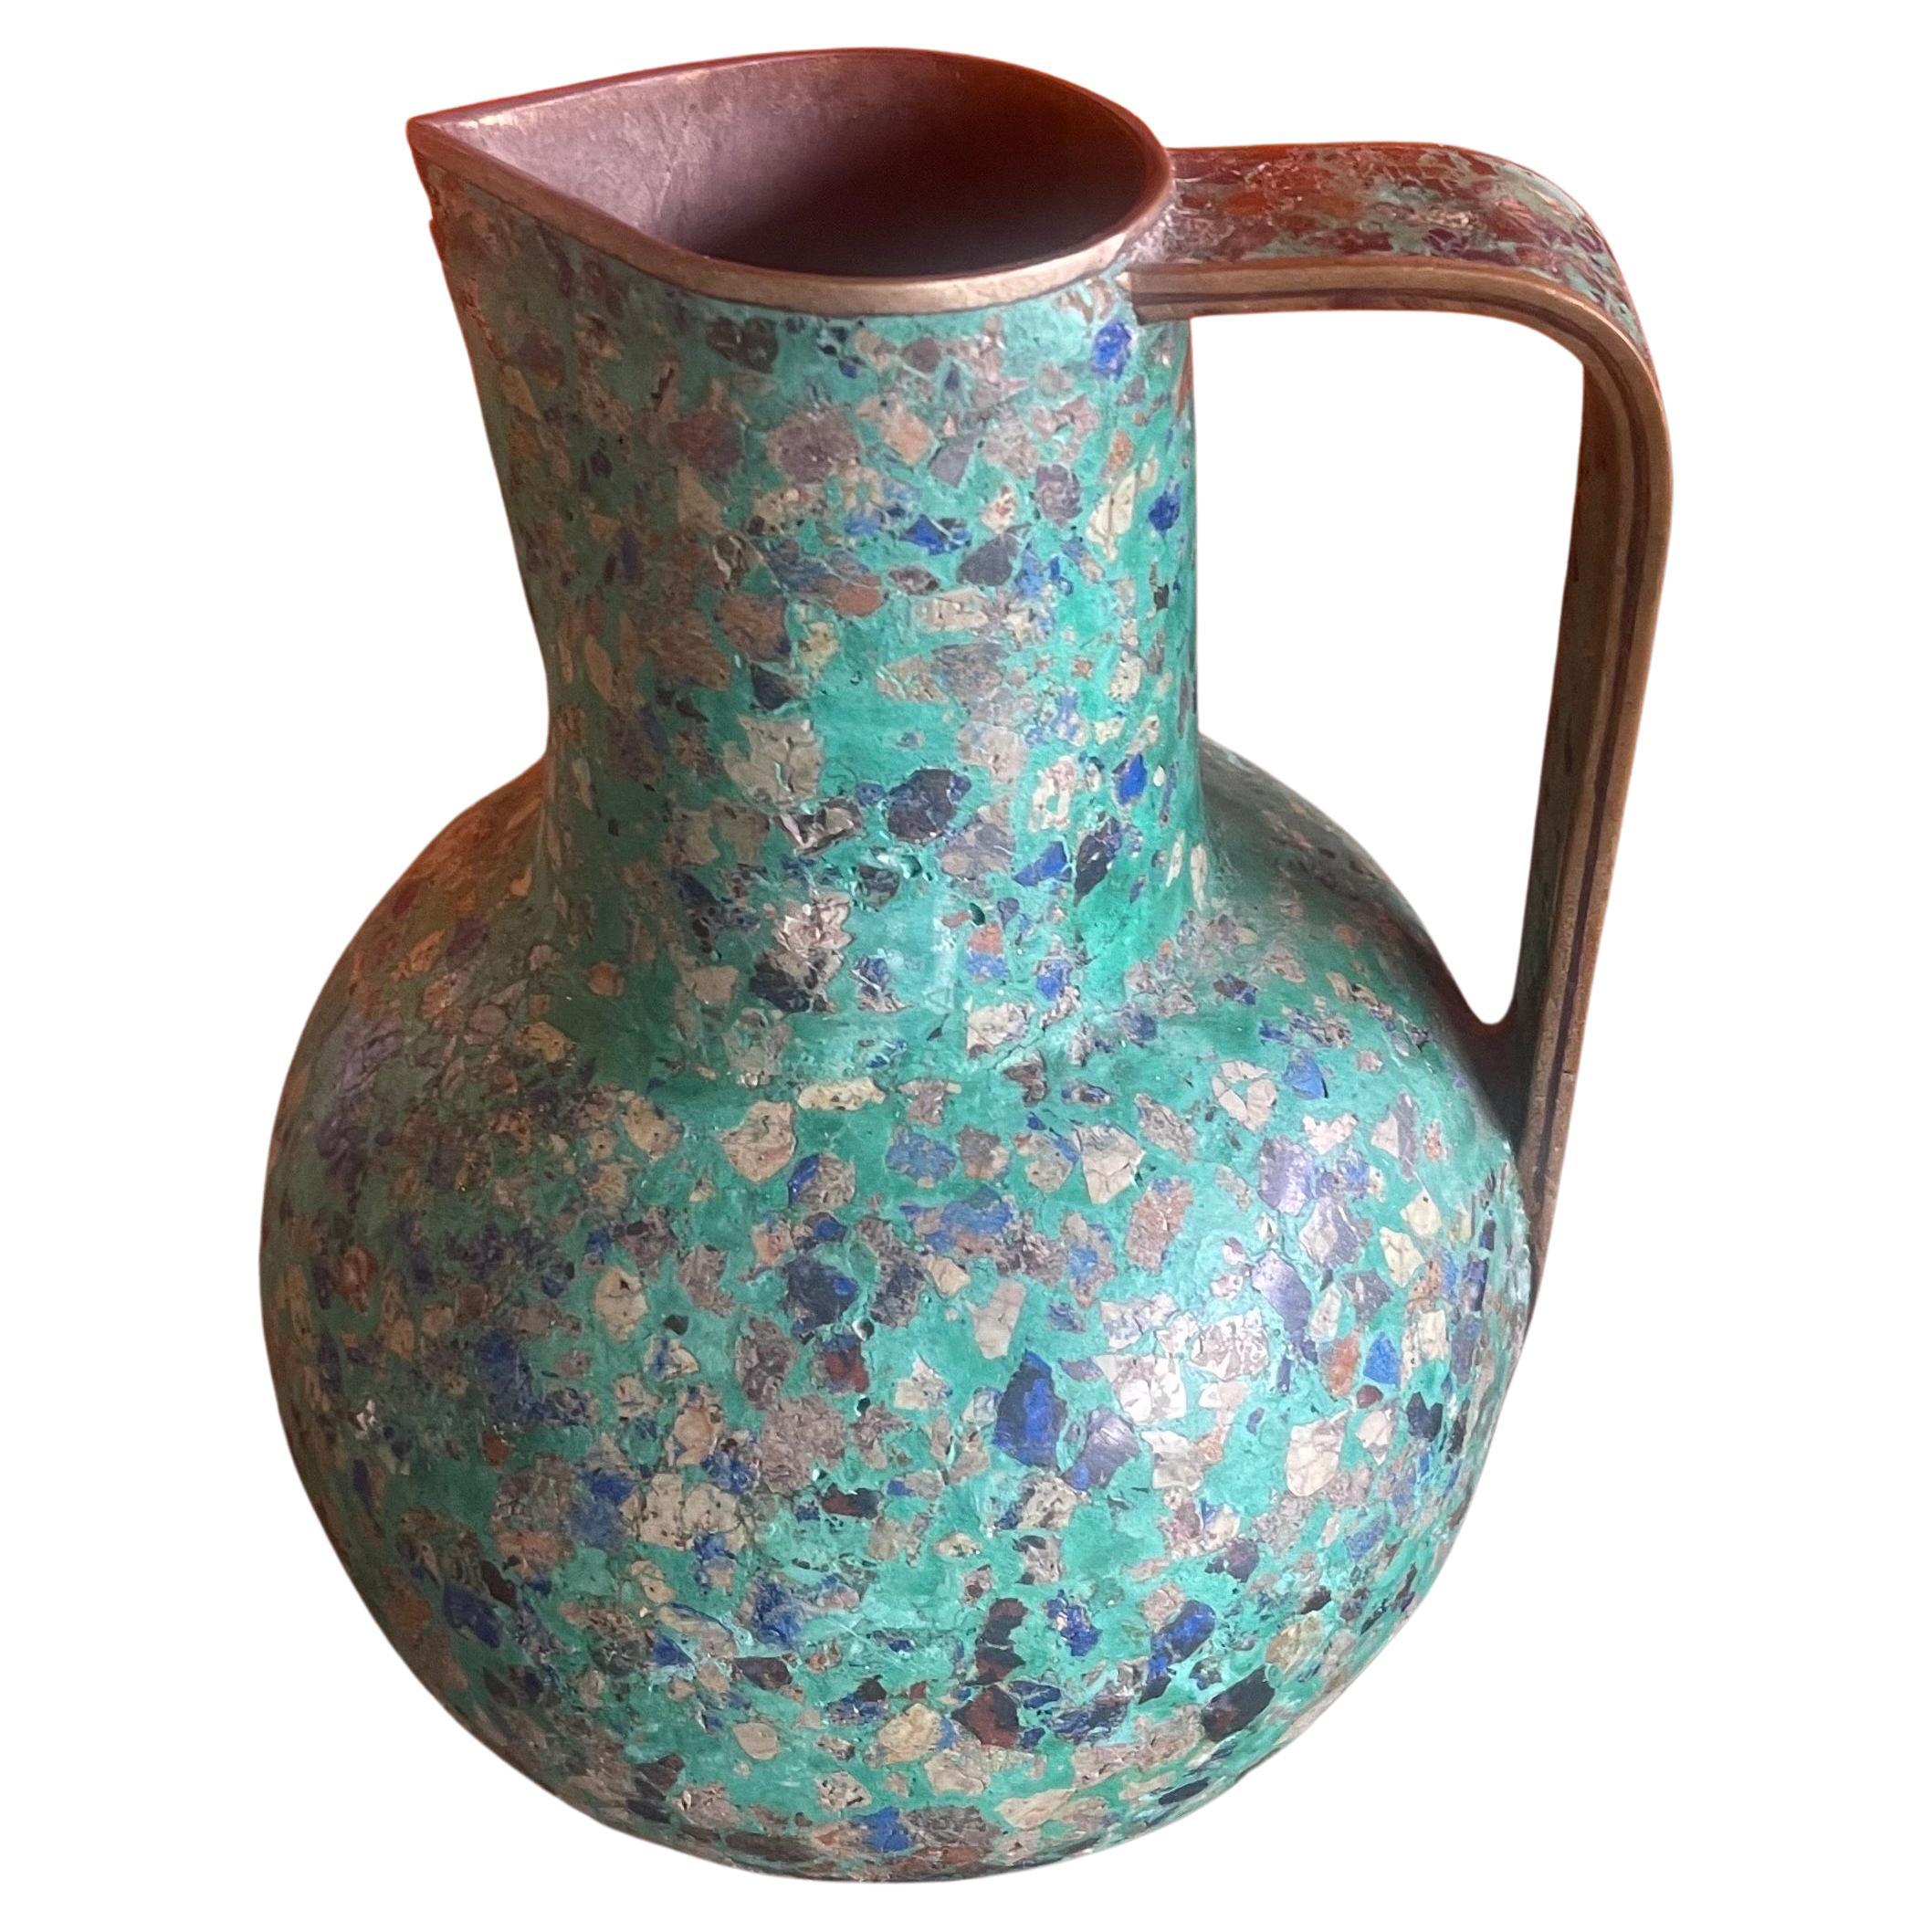 A very unique MCM multi-colored stone on brass ewer or pitcher in the Style of Pepe Mendoza, circa 1970s. The piece is in good vintage condition with a few spots of missing stone (see pictures) and measures 6.5